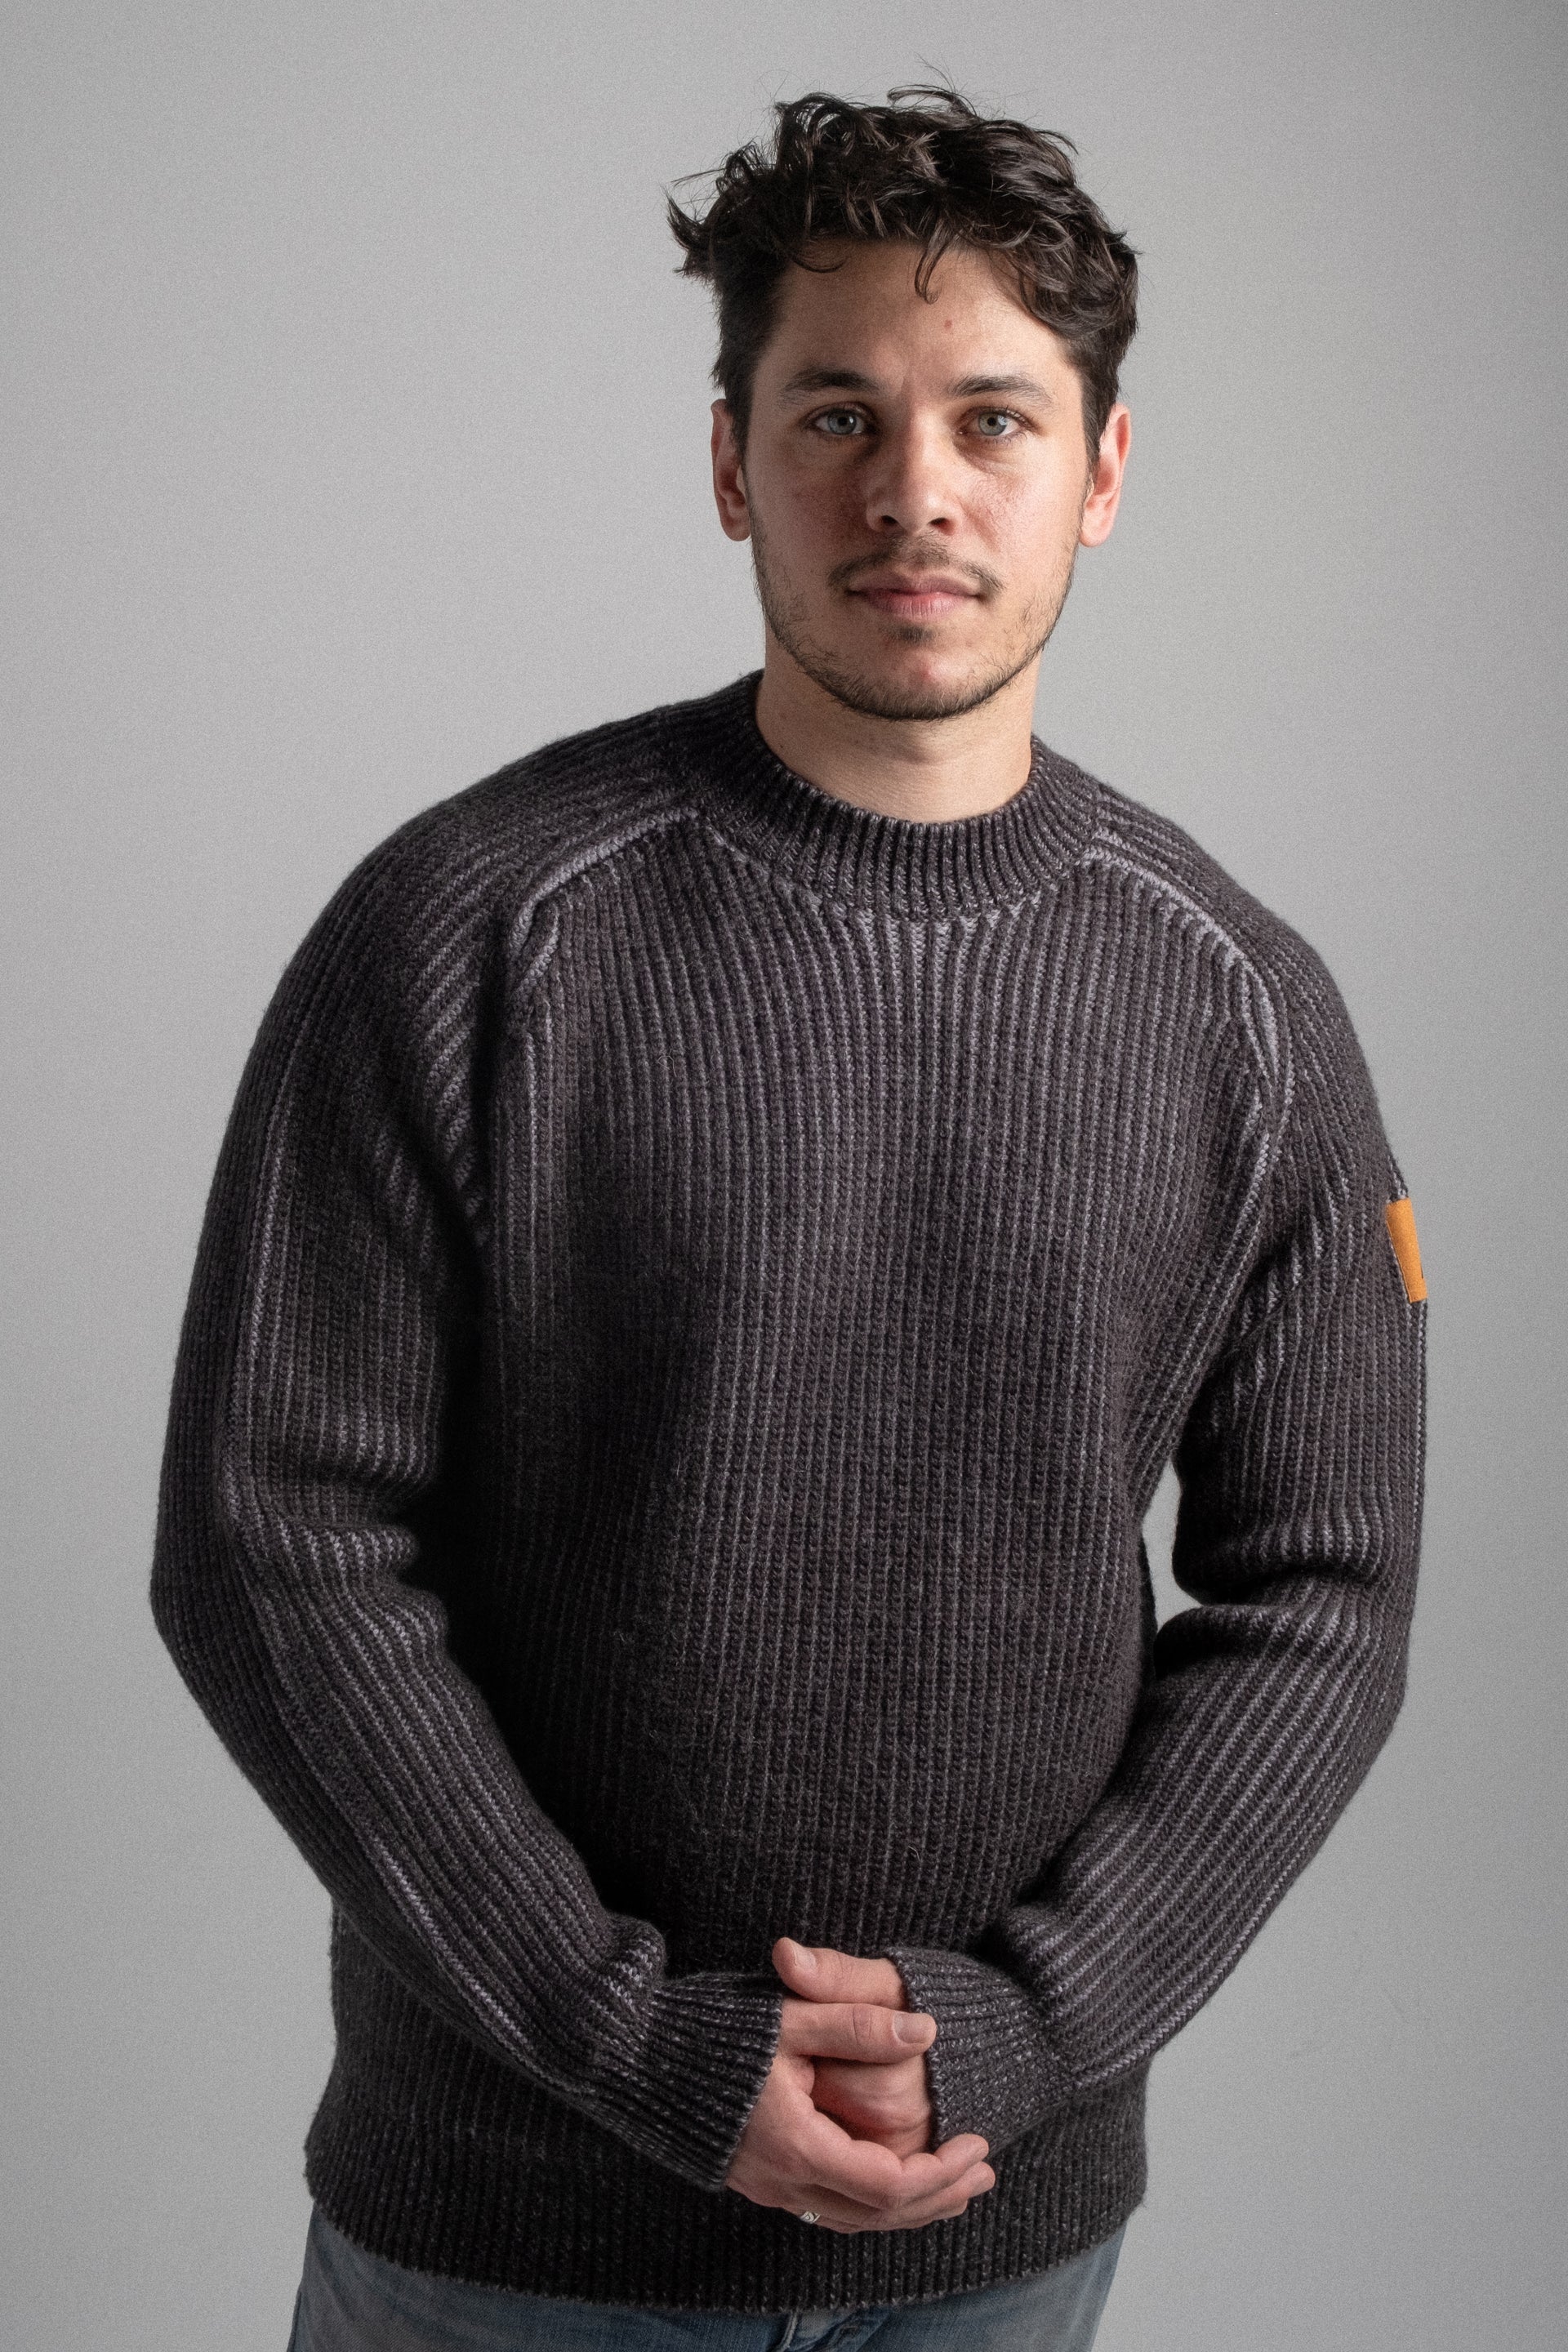 Merino Wool Raglan Sweater with Elbow Patches - Charcoal - Men's